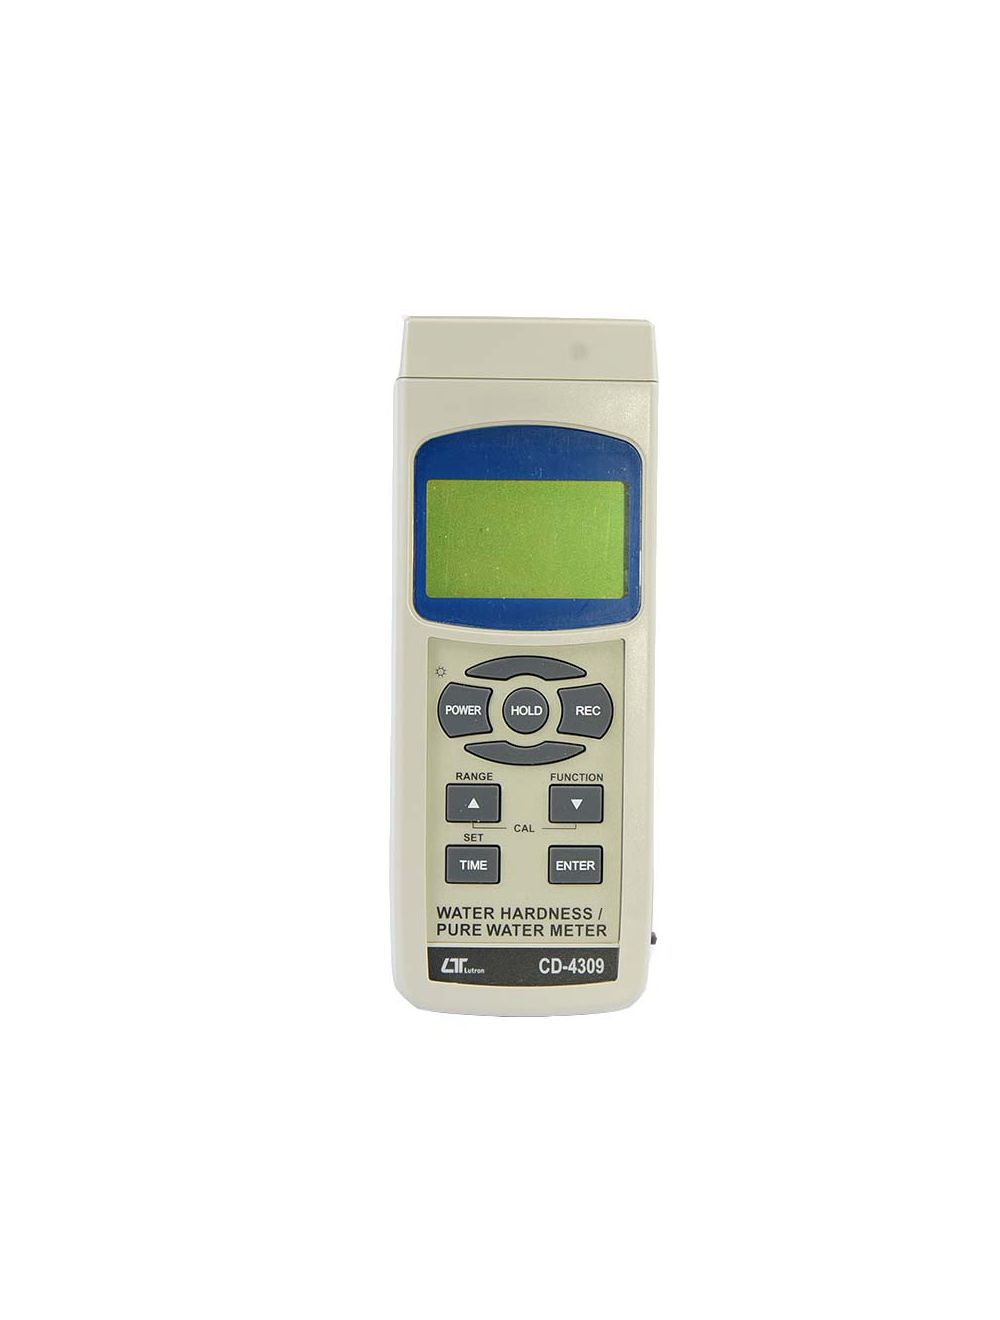 New In stock for sale, Lutron Conductivity Meter CD-4309